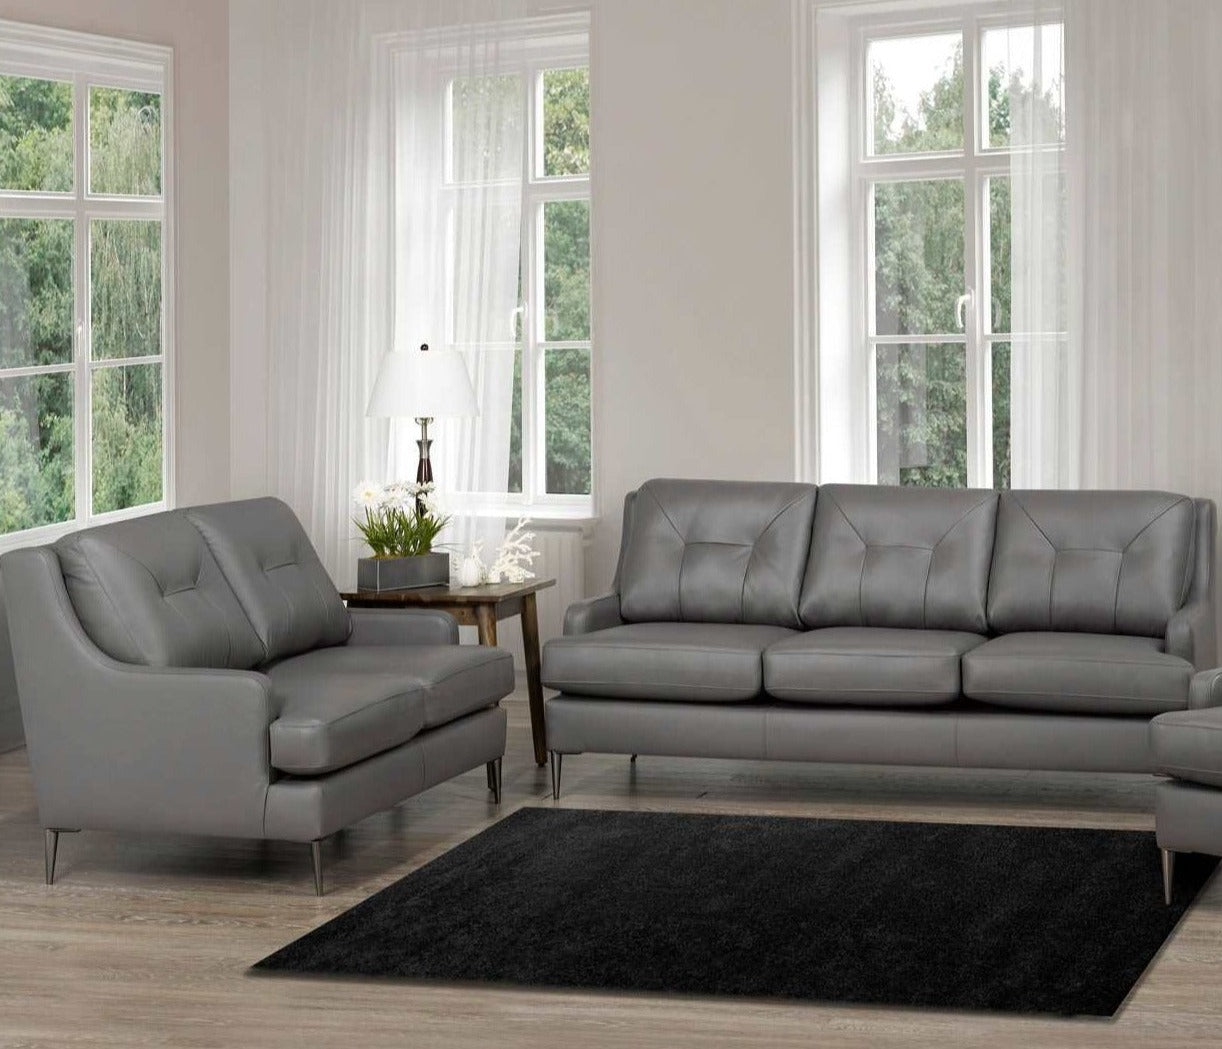 Canadian Made Genuine Leather Florance Fossil Sofa Collection 5557